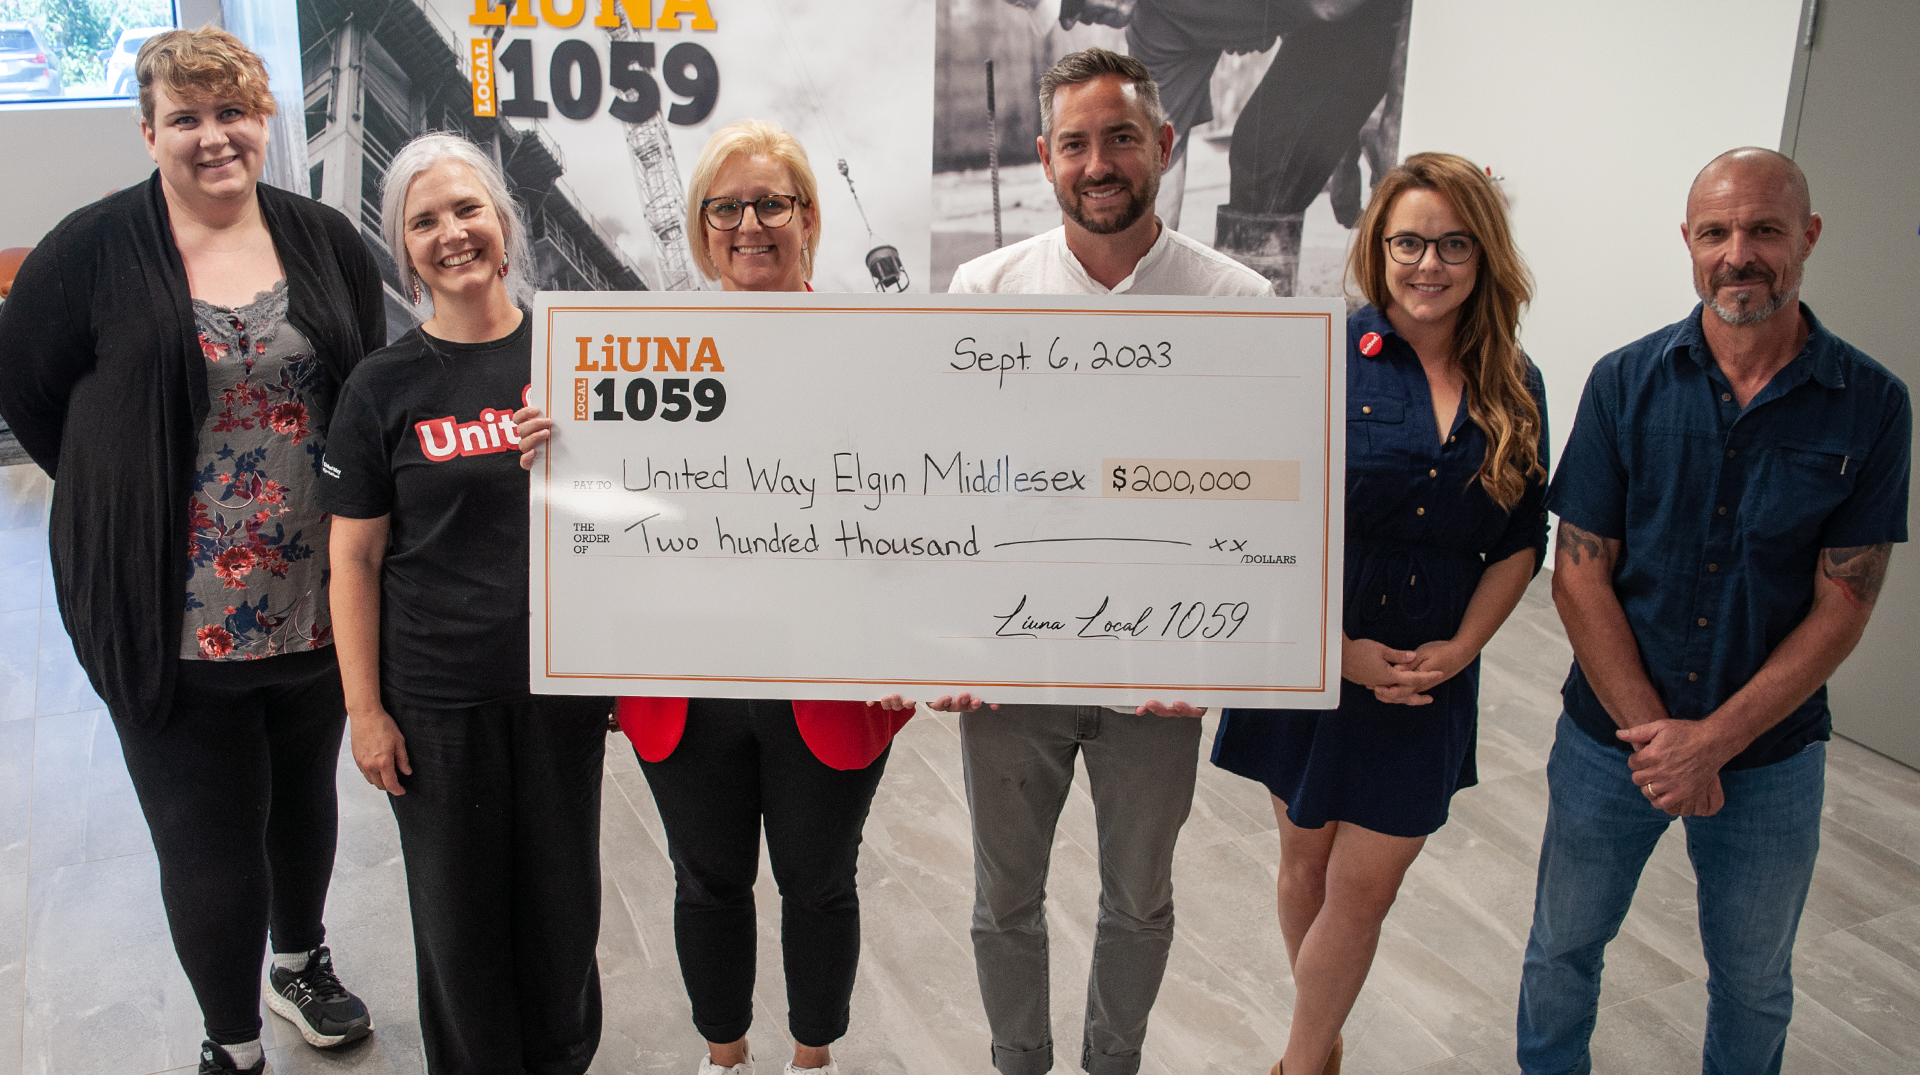 United Way Elgin Middlesex team members Jessica Best, Jennepher Cahill & Kelly Ziegner, President & CEO, celebrate with representatives of LiUNA Local 1059 Brandon MacKinnon, Business Manager, Lauren Donohue & Carlo Mastrogiuseppe.